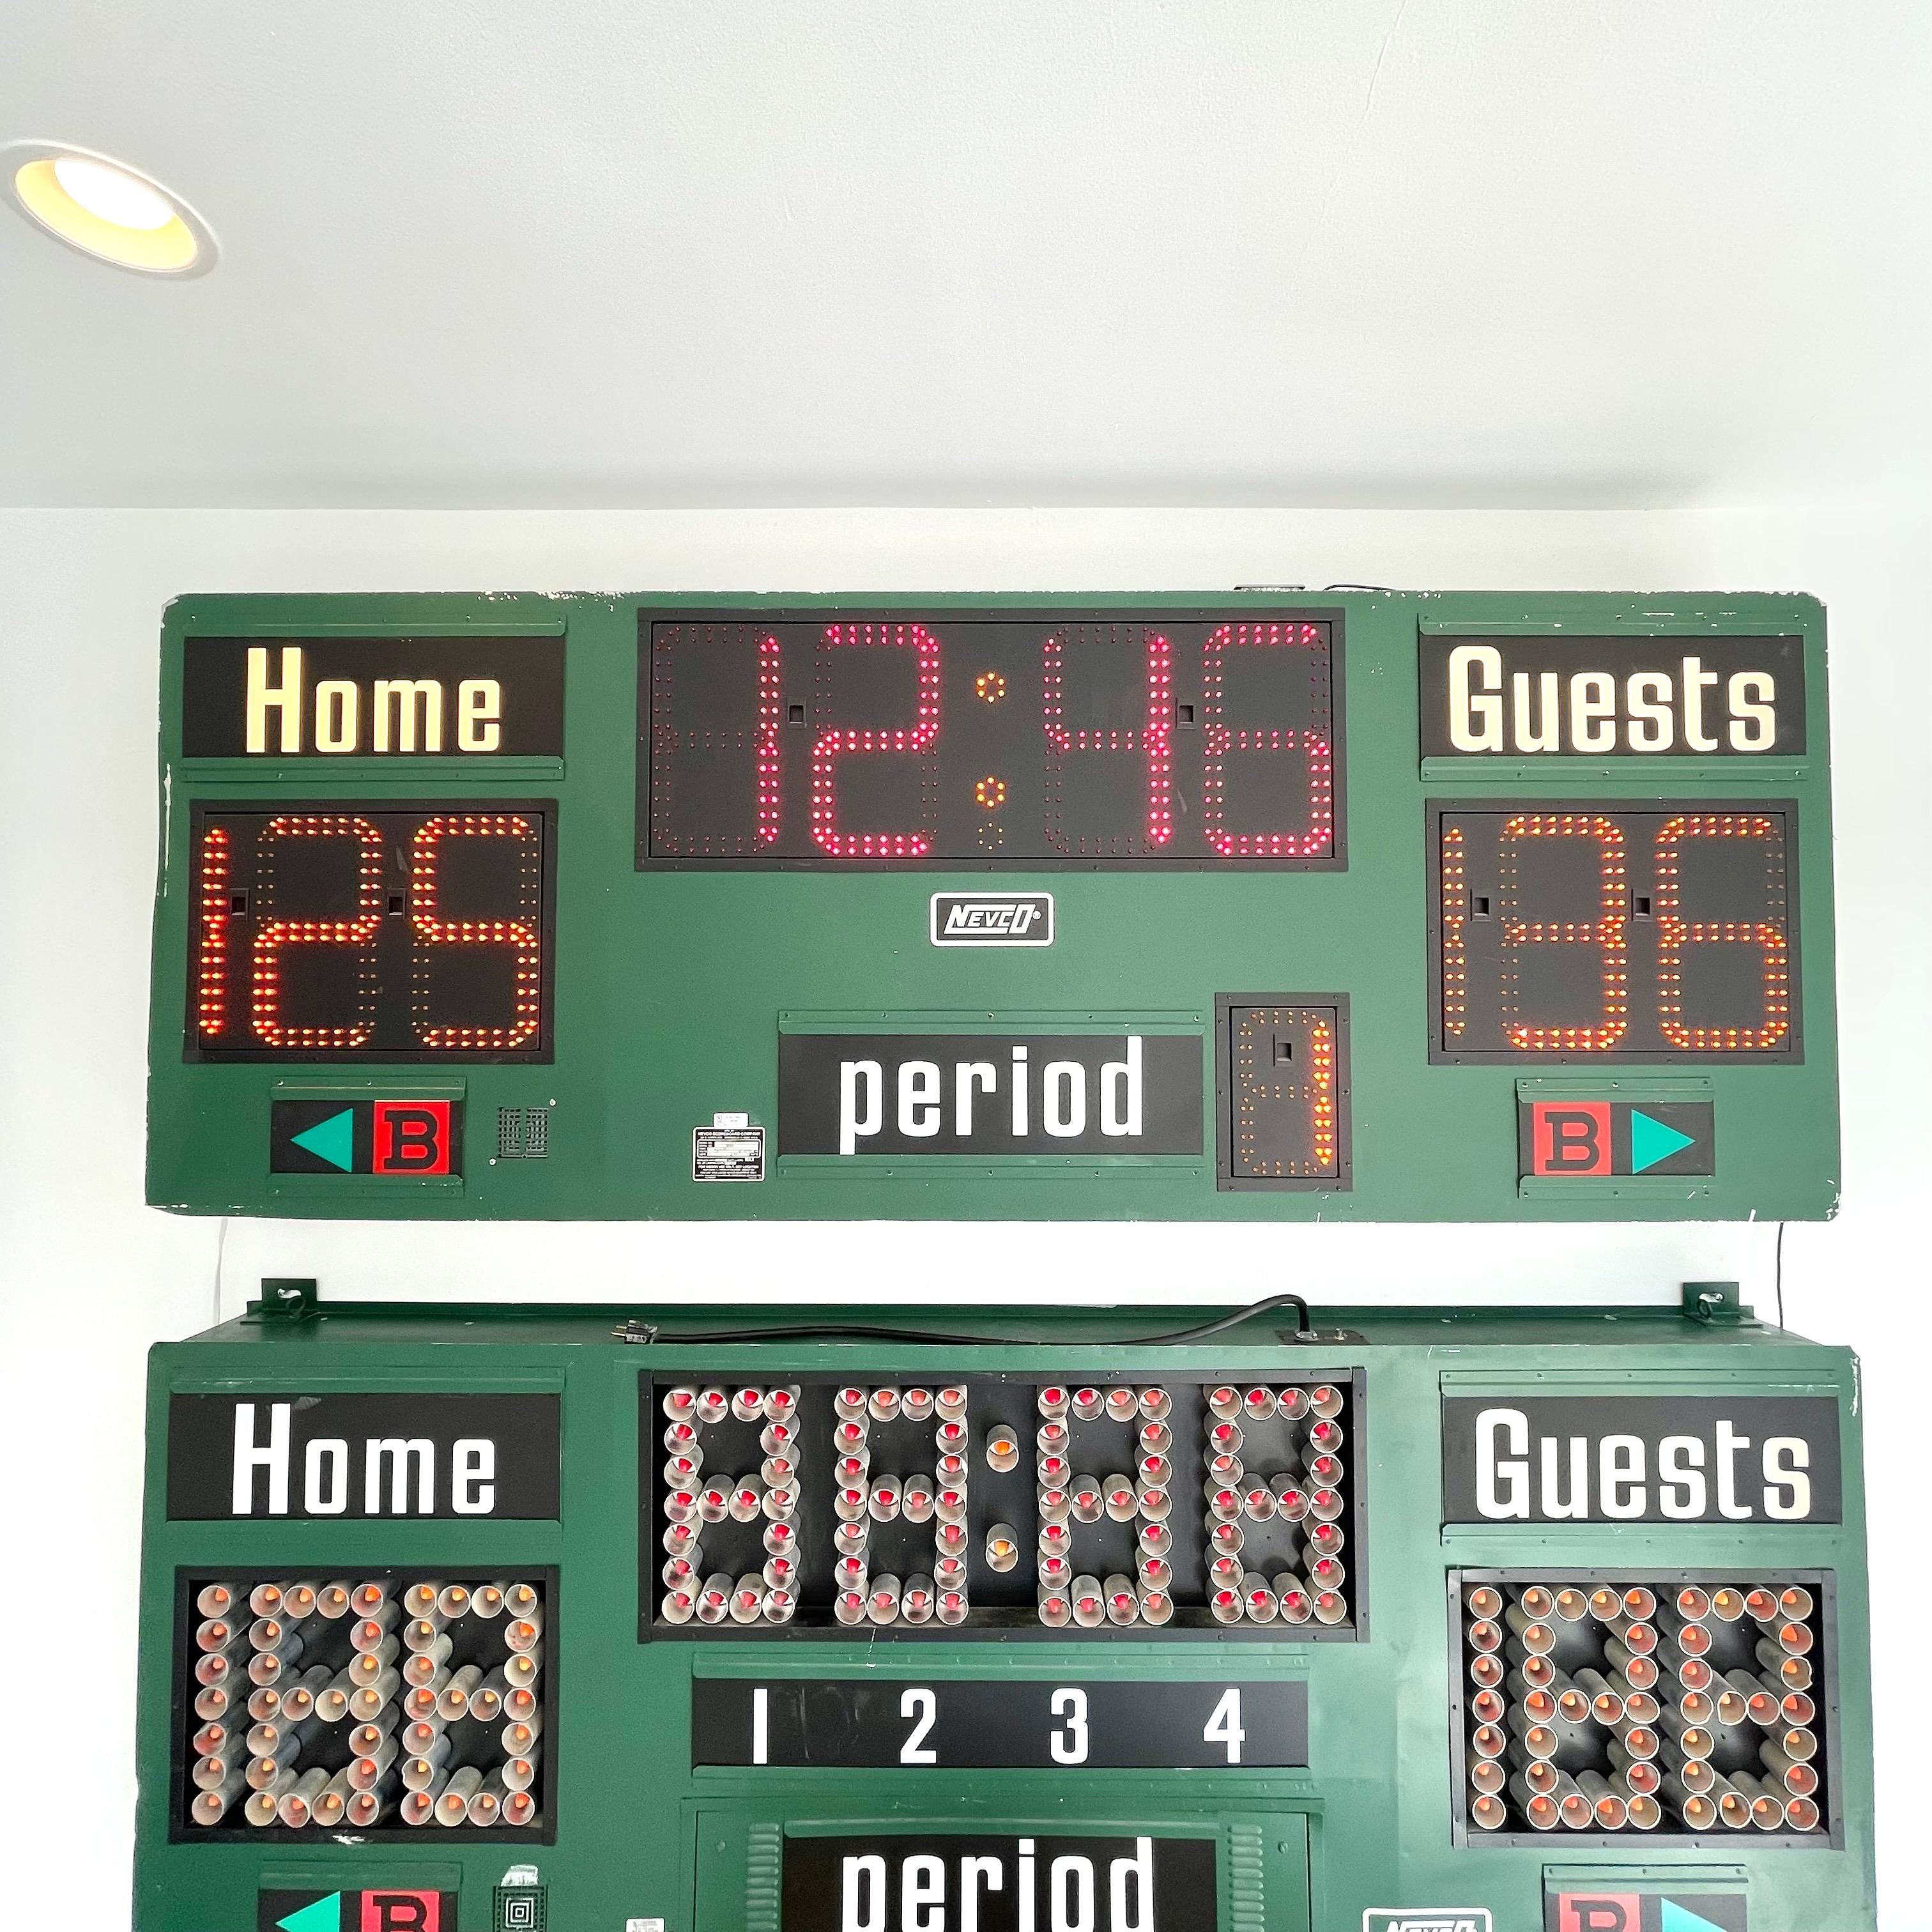 Fantastic green metal LED scoreboard by Nevco. Made in the early 2000s in the US. Can be used for multiple sports. 100% functional and gone through. Running clock, guest and home score and bonus. The entire board runs off LED lights. One of the